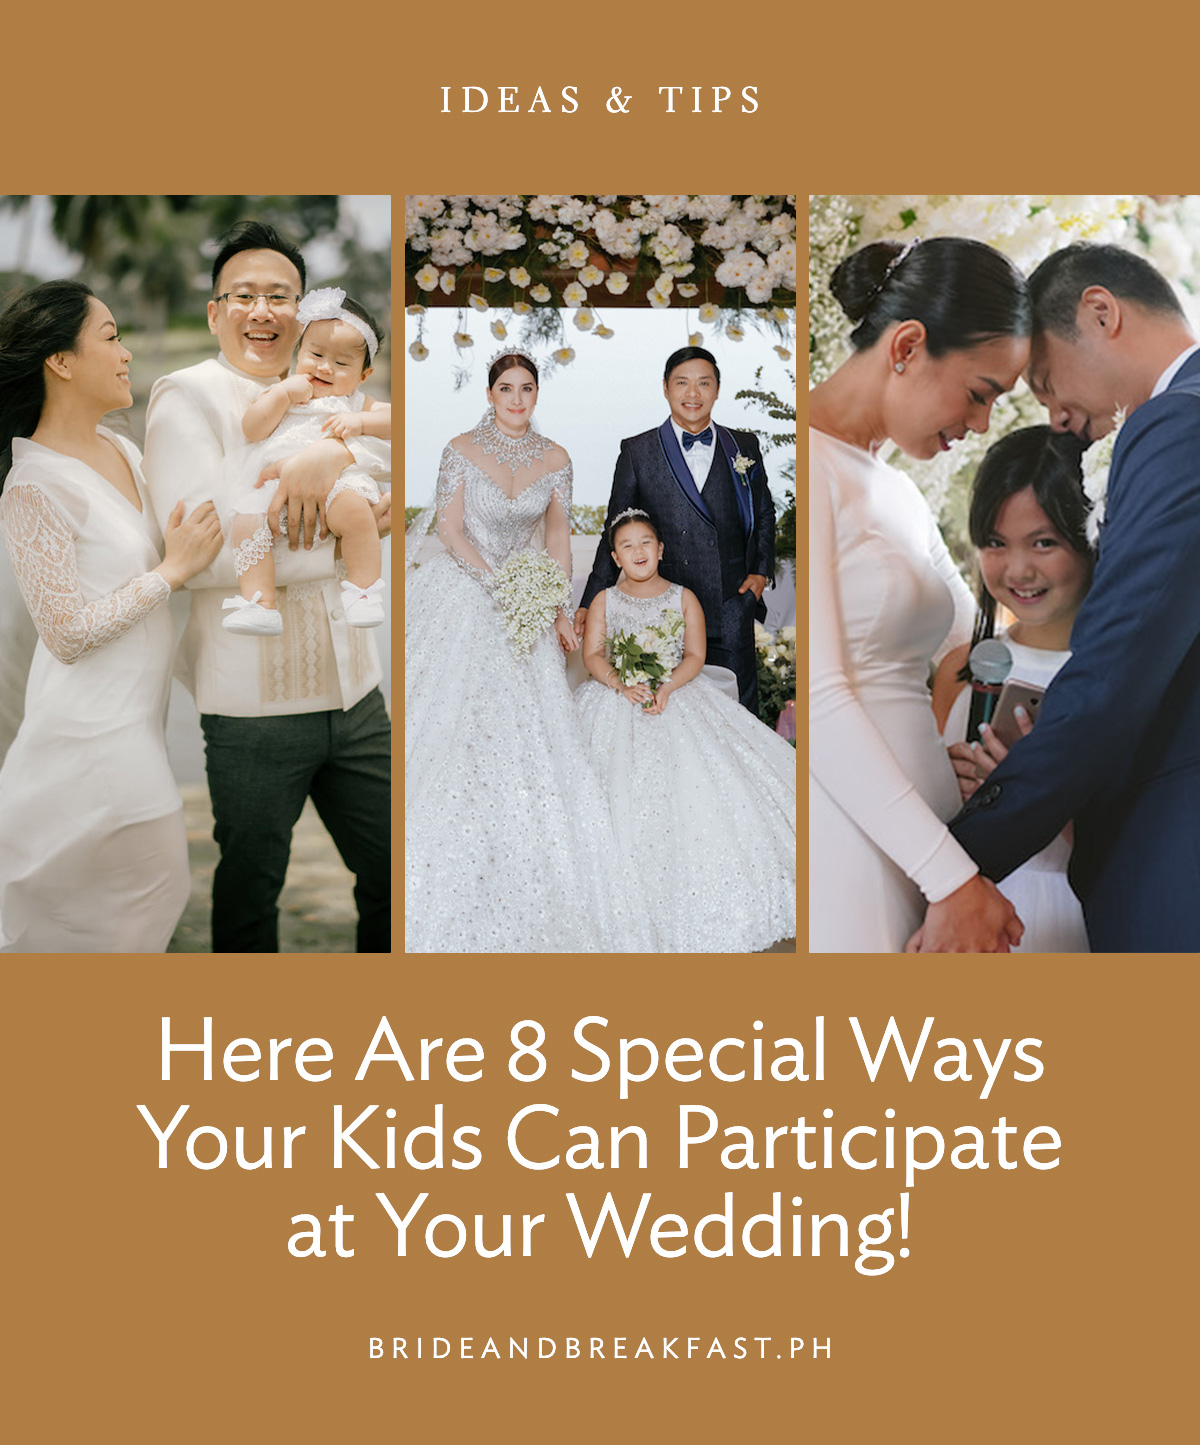 Here Are 8 Special Ways Your Kids Can Participate at Your Wedding!